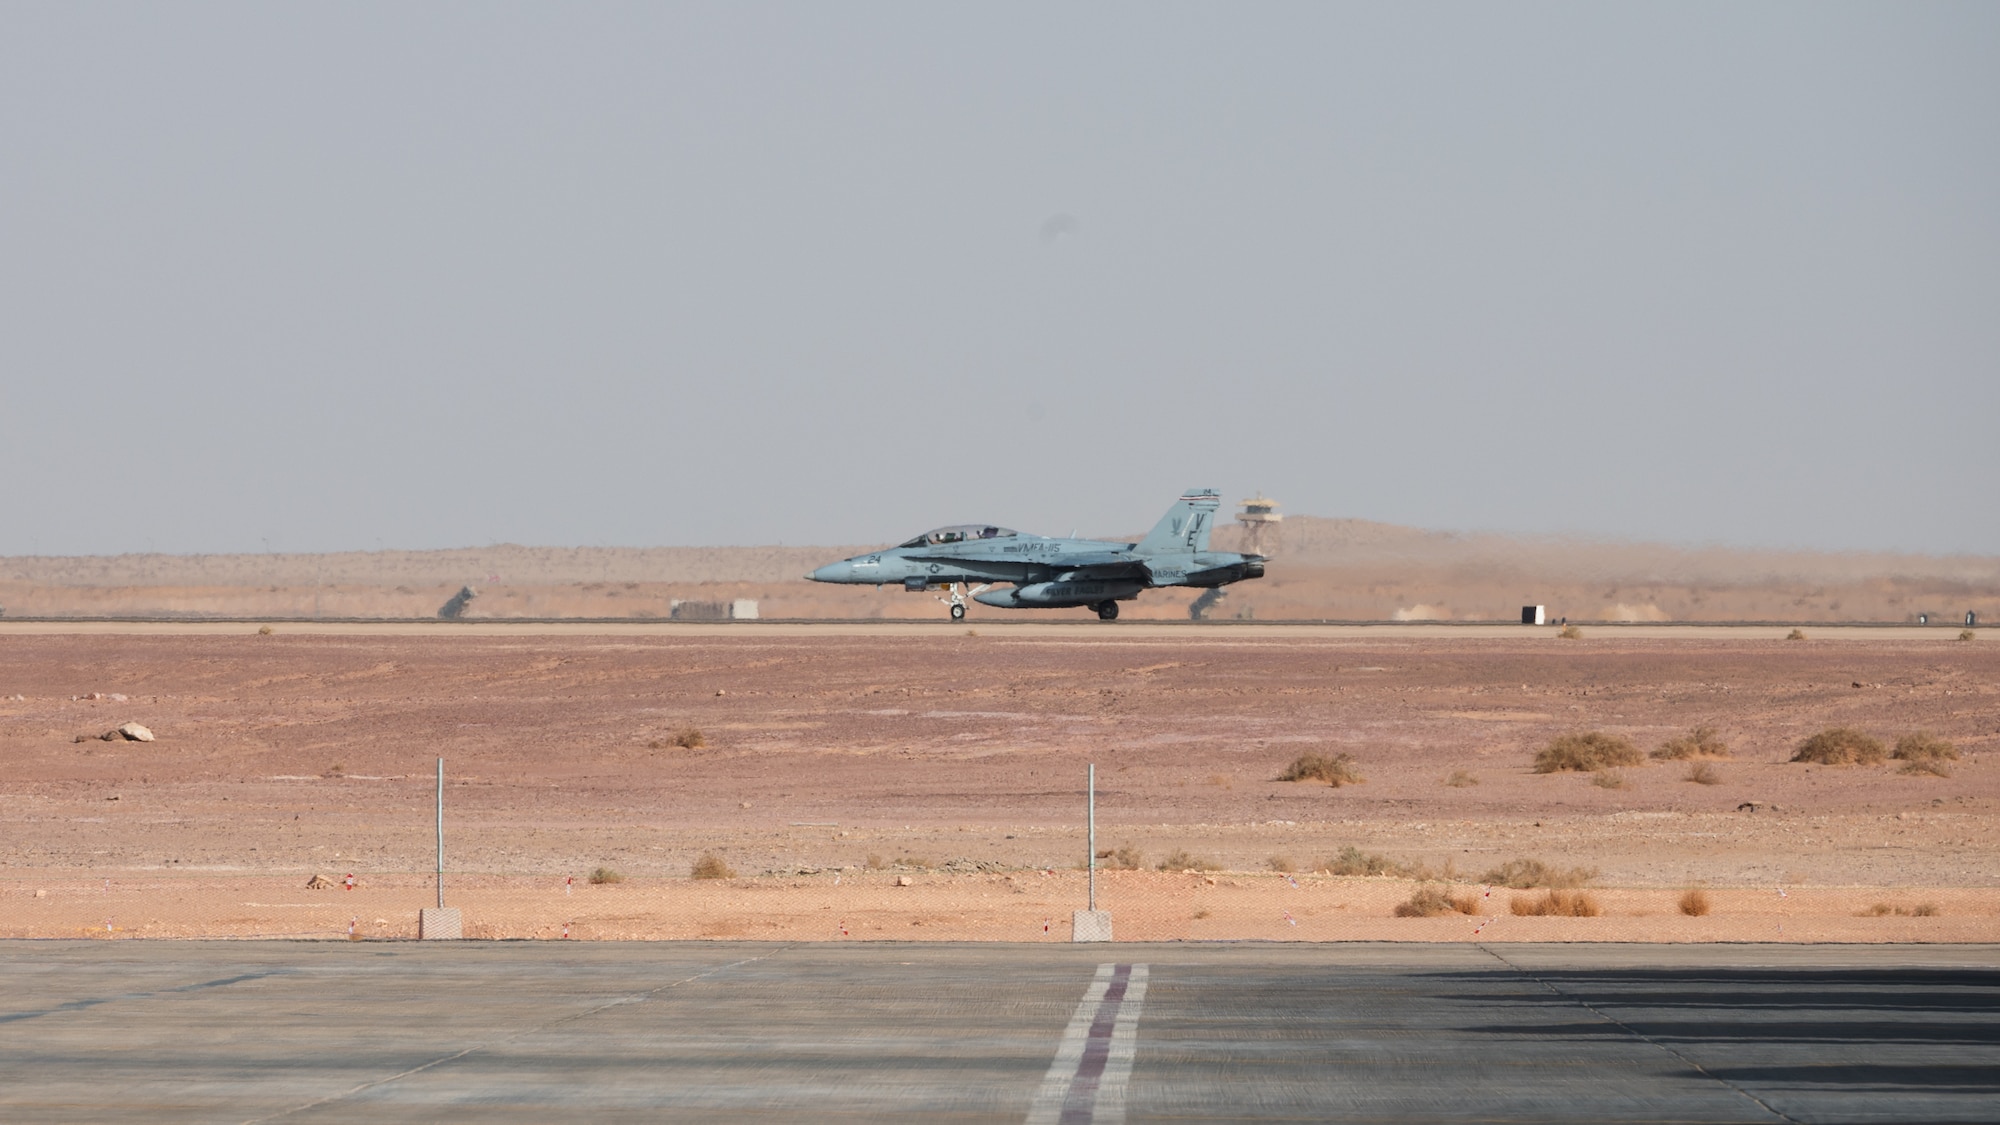 An F/A-18 Hornet lands at Prince Sultan Air Base, Kingdom of Saudi Arabia, Dec. 23, 2021. Marines from the Marine Fighter Attack Squadron 115 deployed to PSAB to maximize regional capabilities in regards to mutual security concerns. (U.S. Air Force photo by Senior Airman Jacob B. Wrightsman)